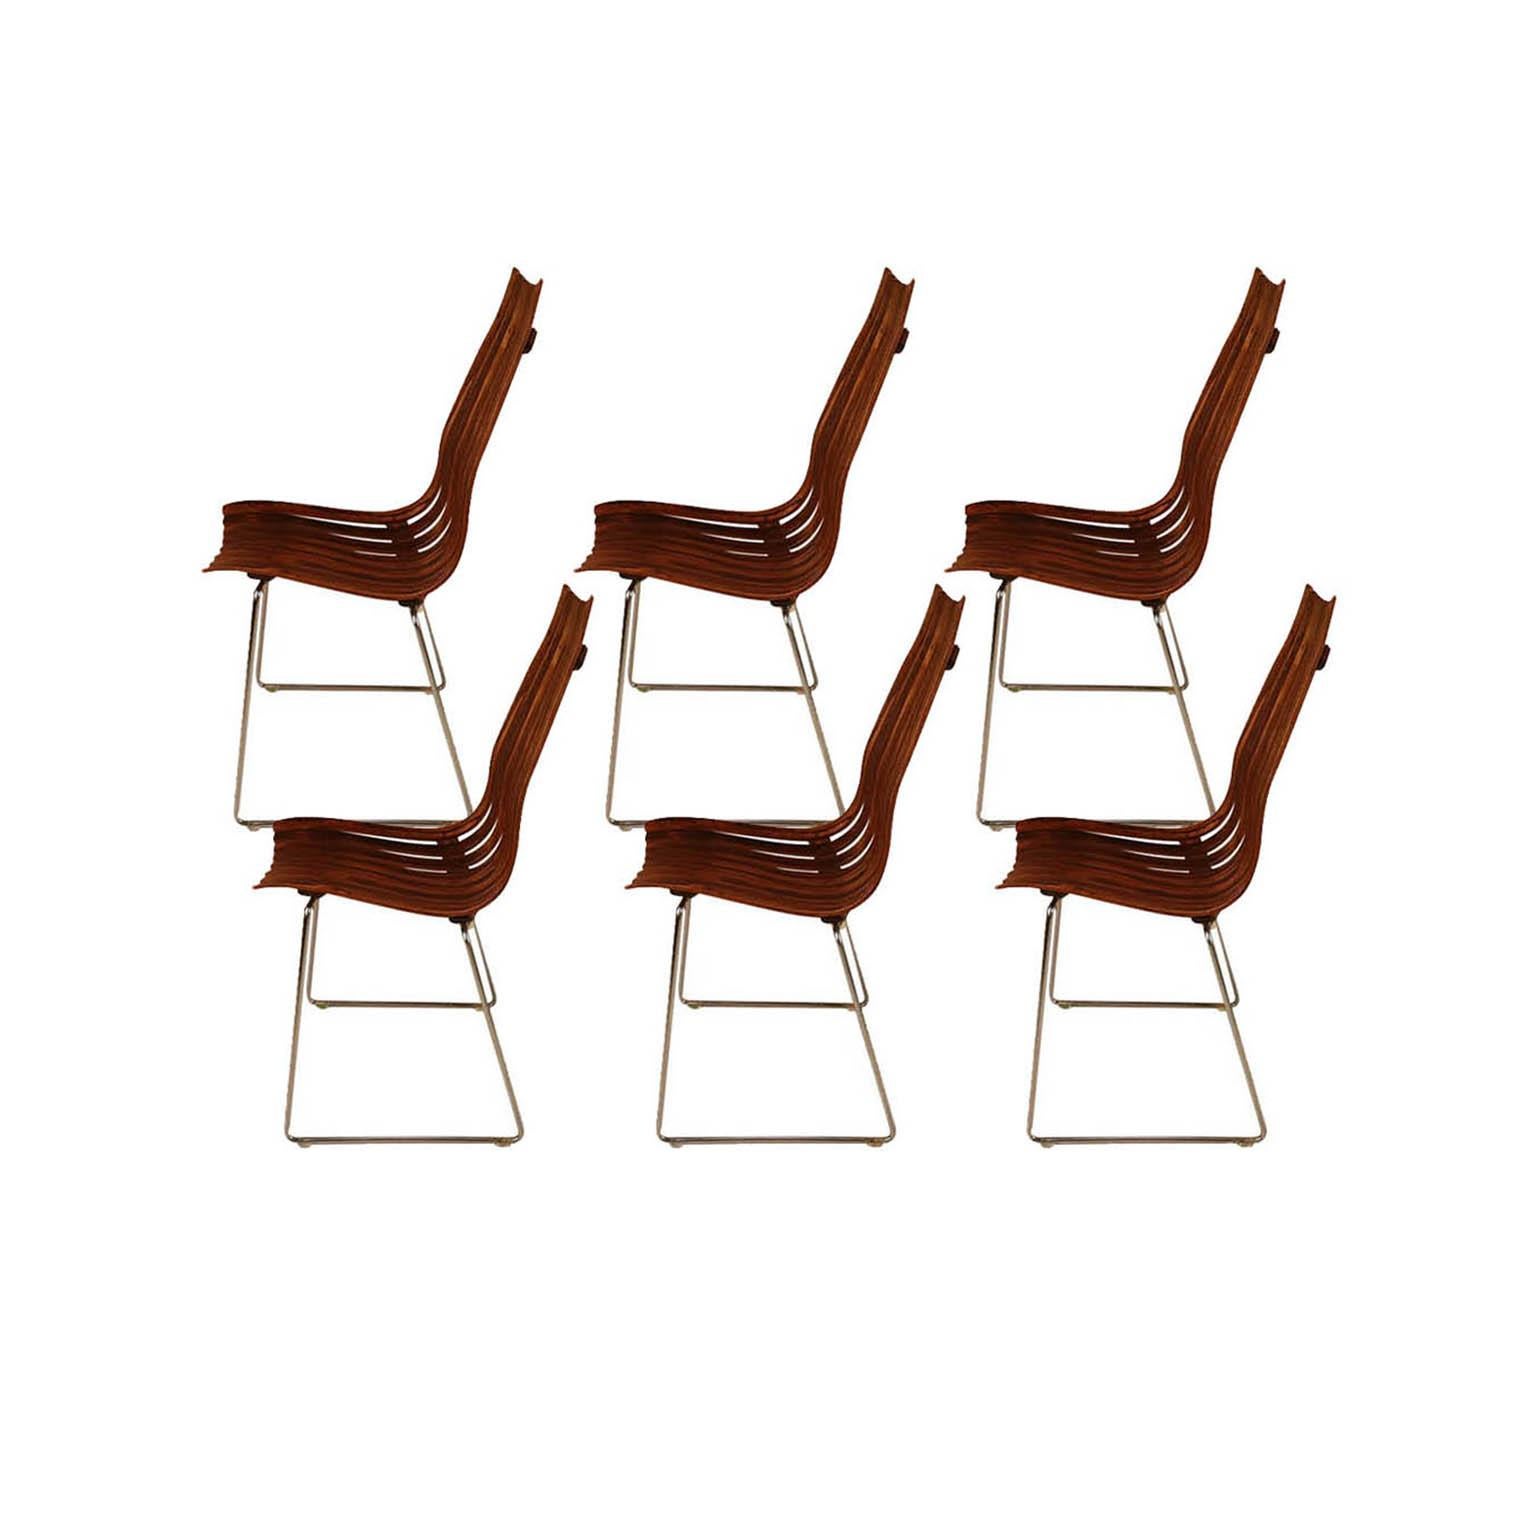 A rare set of six stunning midcentury, modern, stackable, high back, rosewood, senior, dining chairs part of the “Scandia” series, designed by Hans Brattrud for Hove Møbler, Norway, circa 1957. One of the most unique designs to come from the